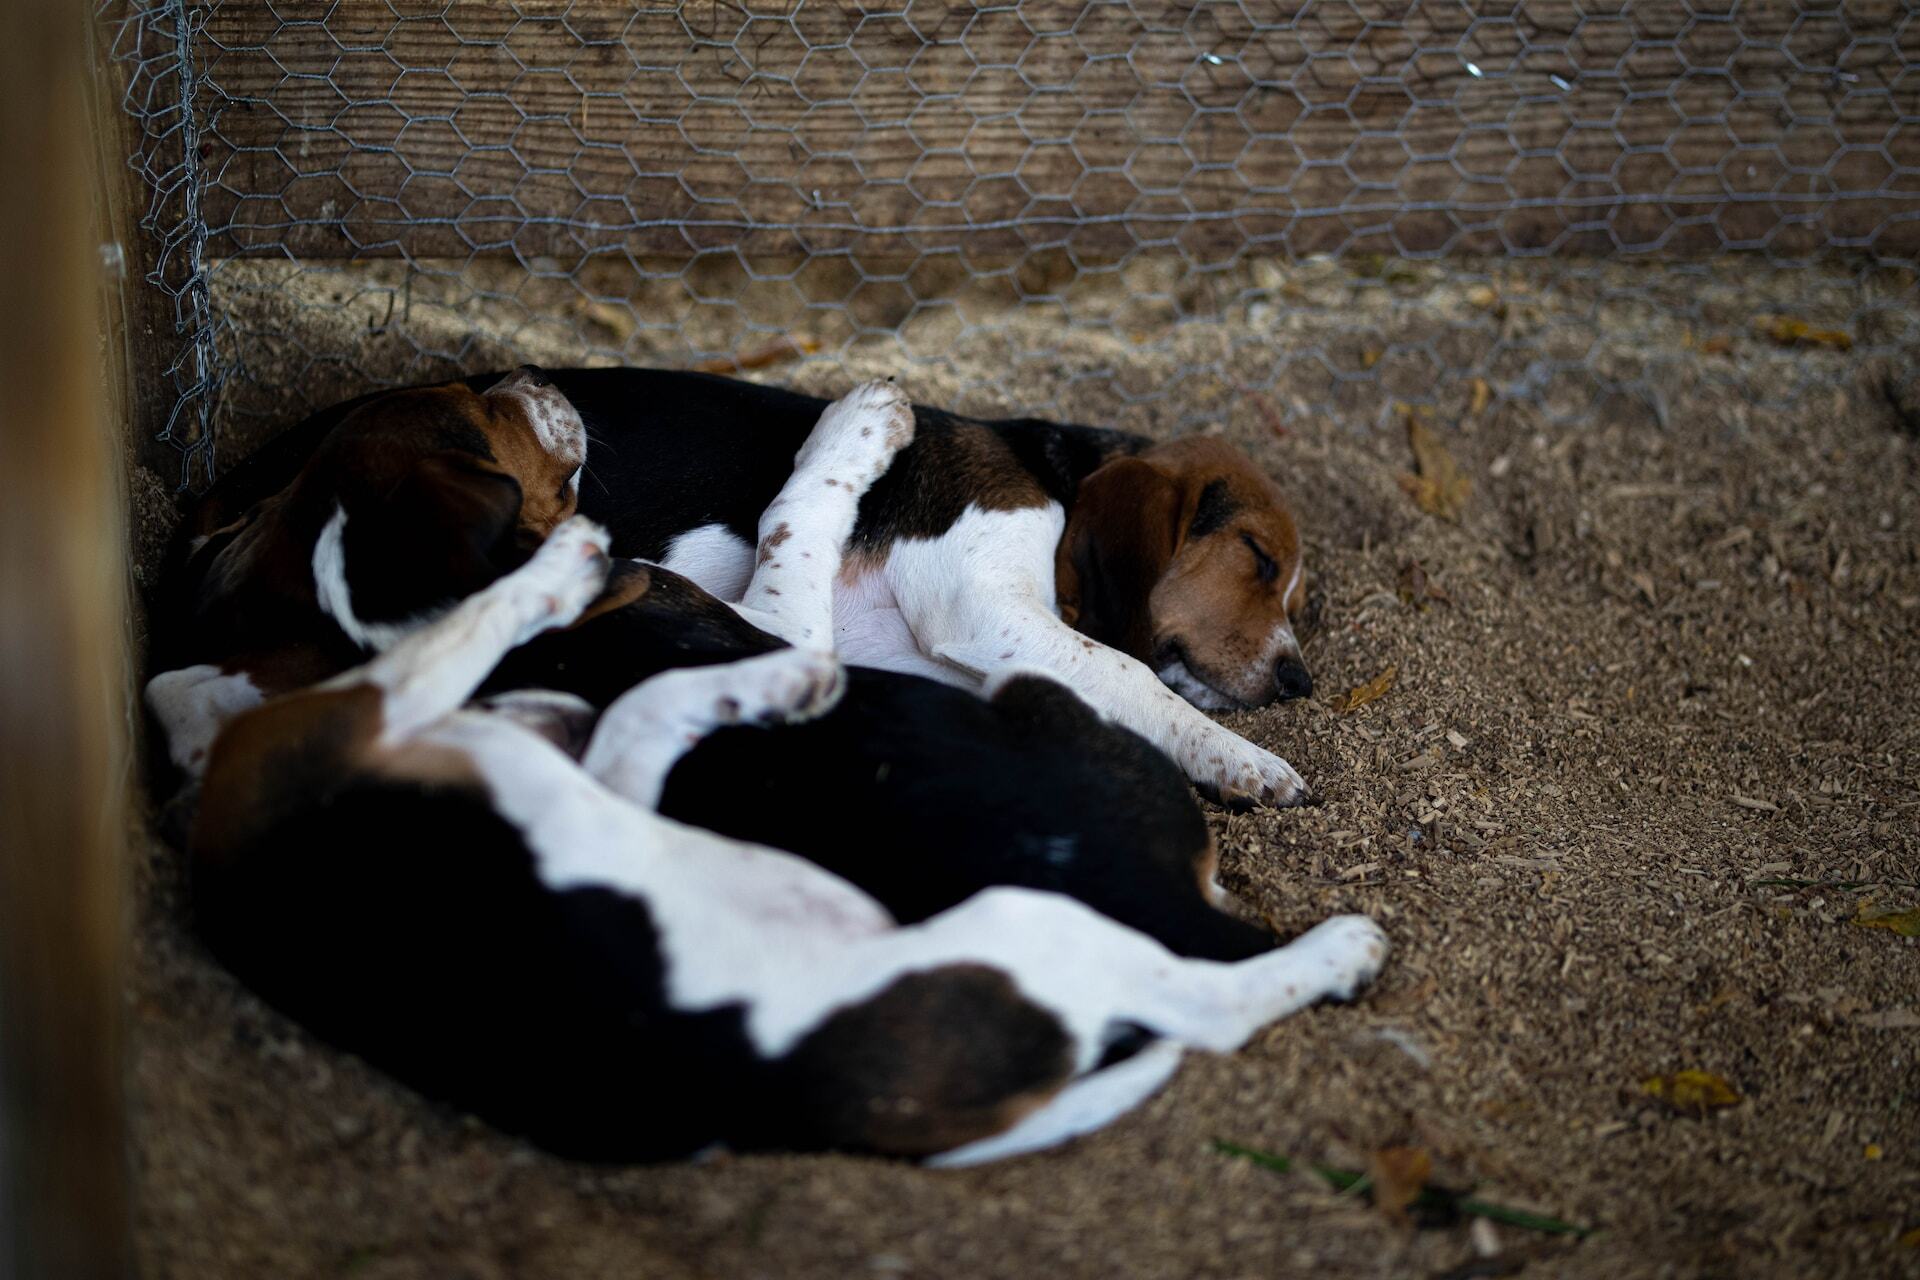 A litter of Beagles sleeping together in a shed